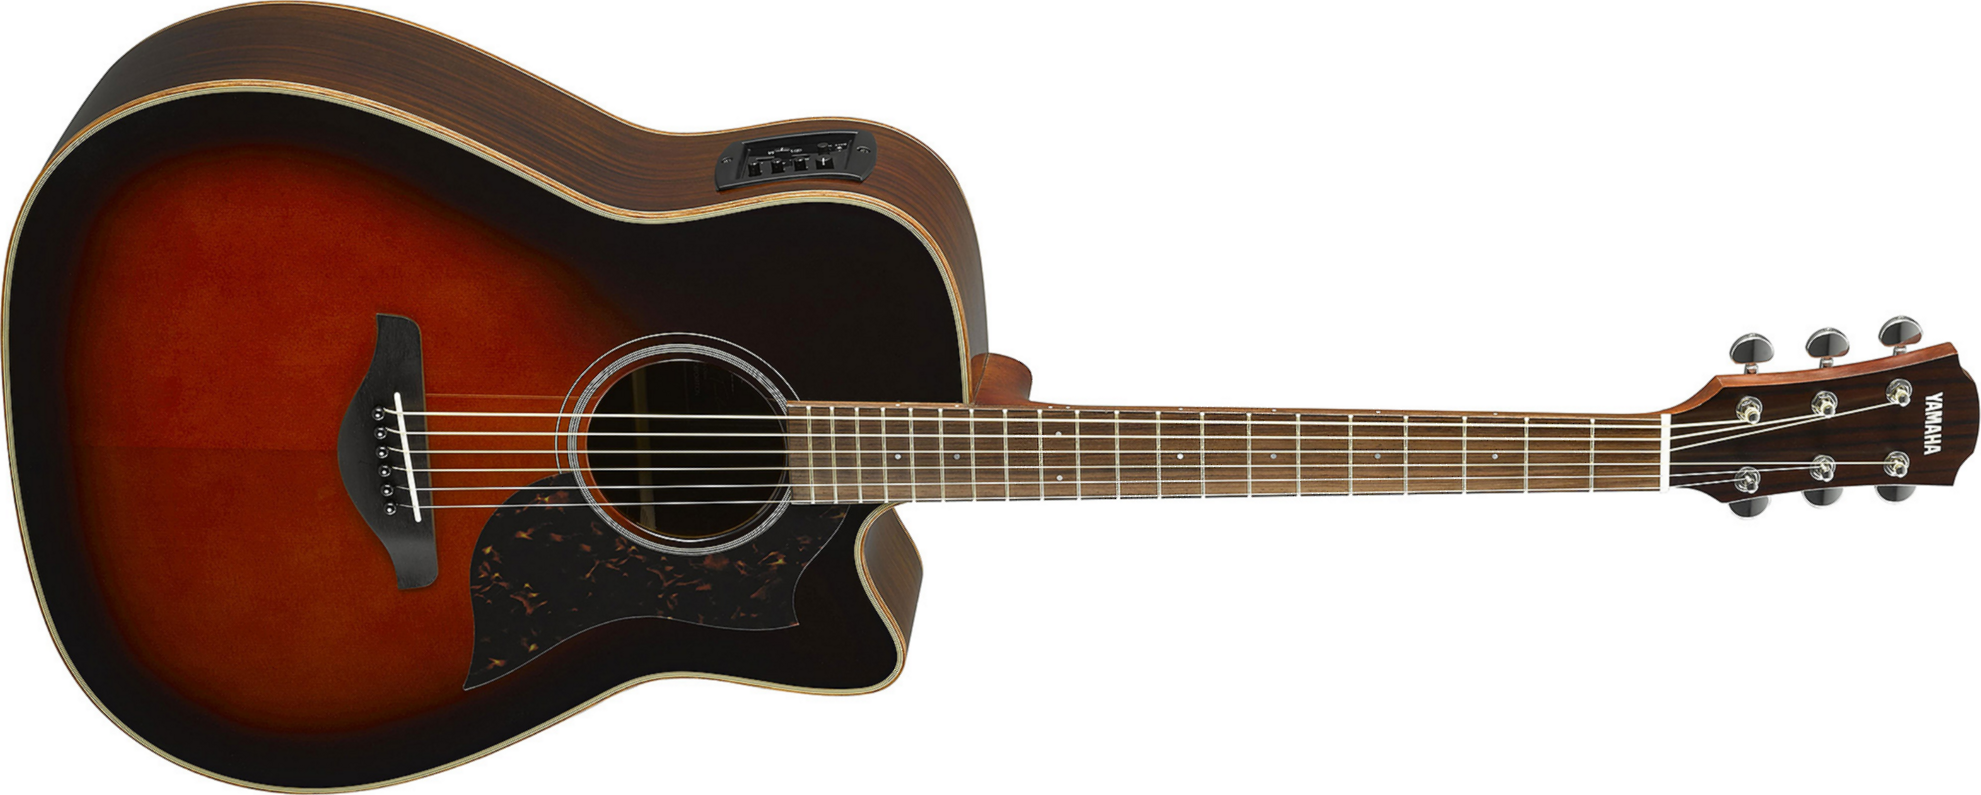 Yamaha A1r Ii Tbs Dreadnought Cw Epicea Palissandre 2017 - Tobacco Brown Sunburst - Electro acoustic guitar - Main picture